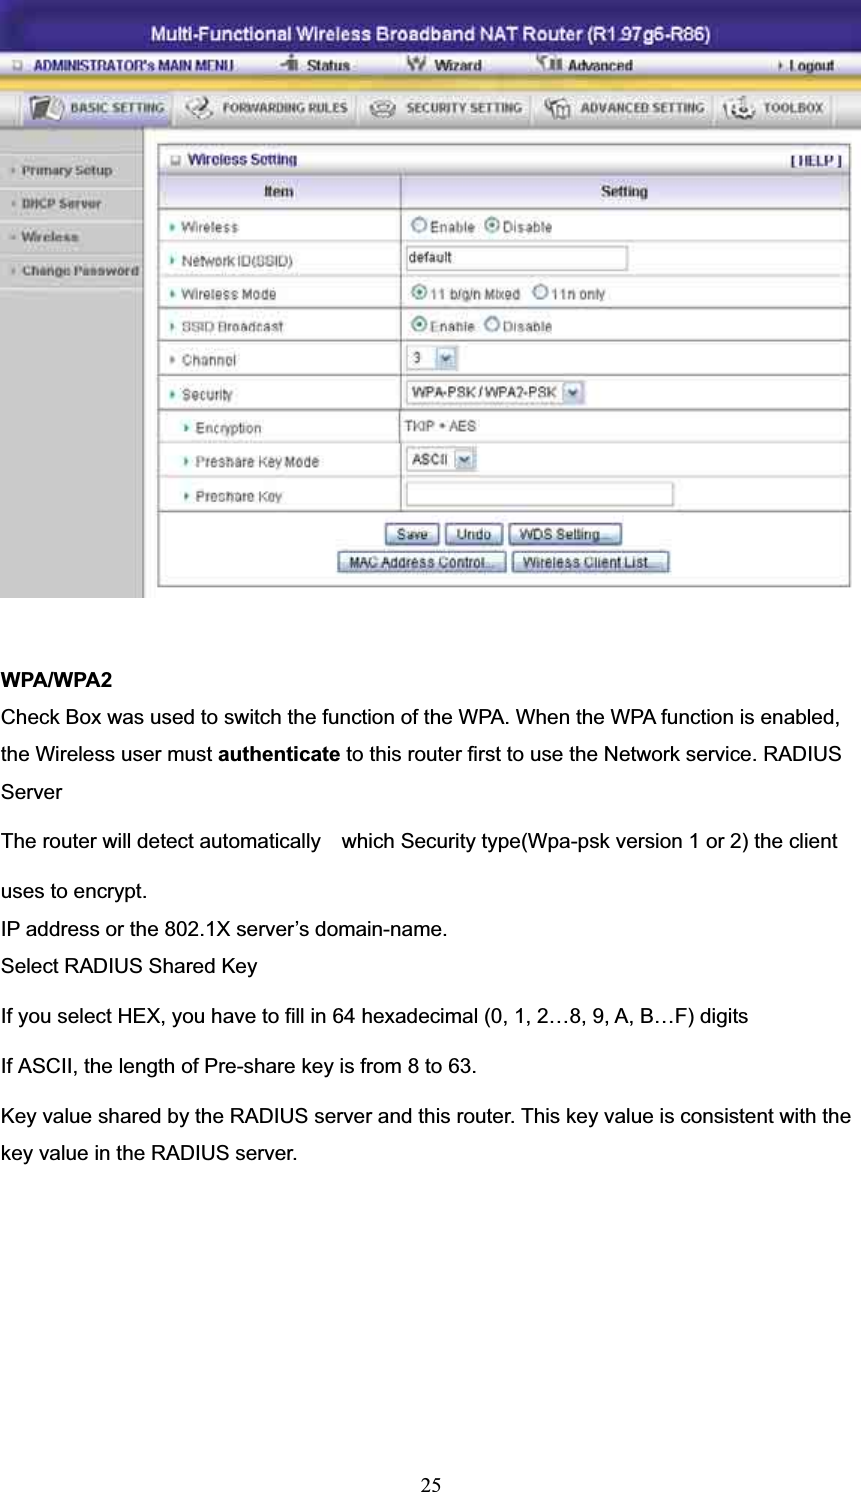 WPA/WPA2 Check Box was used to switch the function of the WPA. When the WPA function is enabled, the Wireless user must authenticate to this router first to use the Network service. RADIUS ServerThe router will detect automatically    which Security type(Wpa-psk version 1 or 2) the client   uses to encrypt. IP address or the 802.1X server’s domain-name.   Select RADIUS Shared Key If you select HEX, you have to fill in 64 hexadecimal (0, 1, 2…8, 9, A, B…F) digits If ASCII, the length of Pre-share key is from 8 to 63. Key value shared by the RADIUS server and this router. This key value is consistent with the key value in the RADIUS server. 25